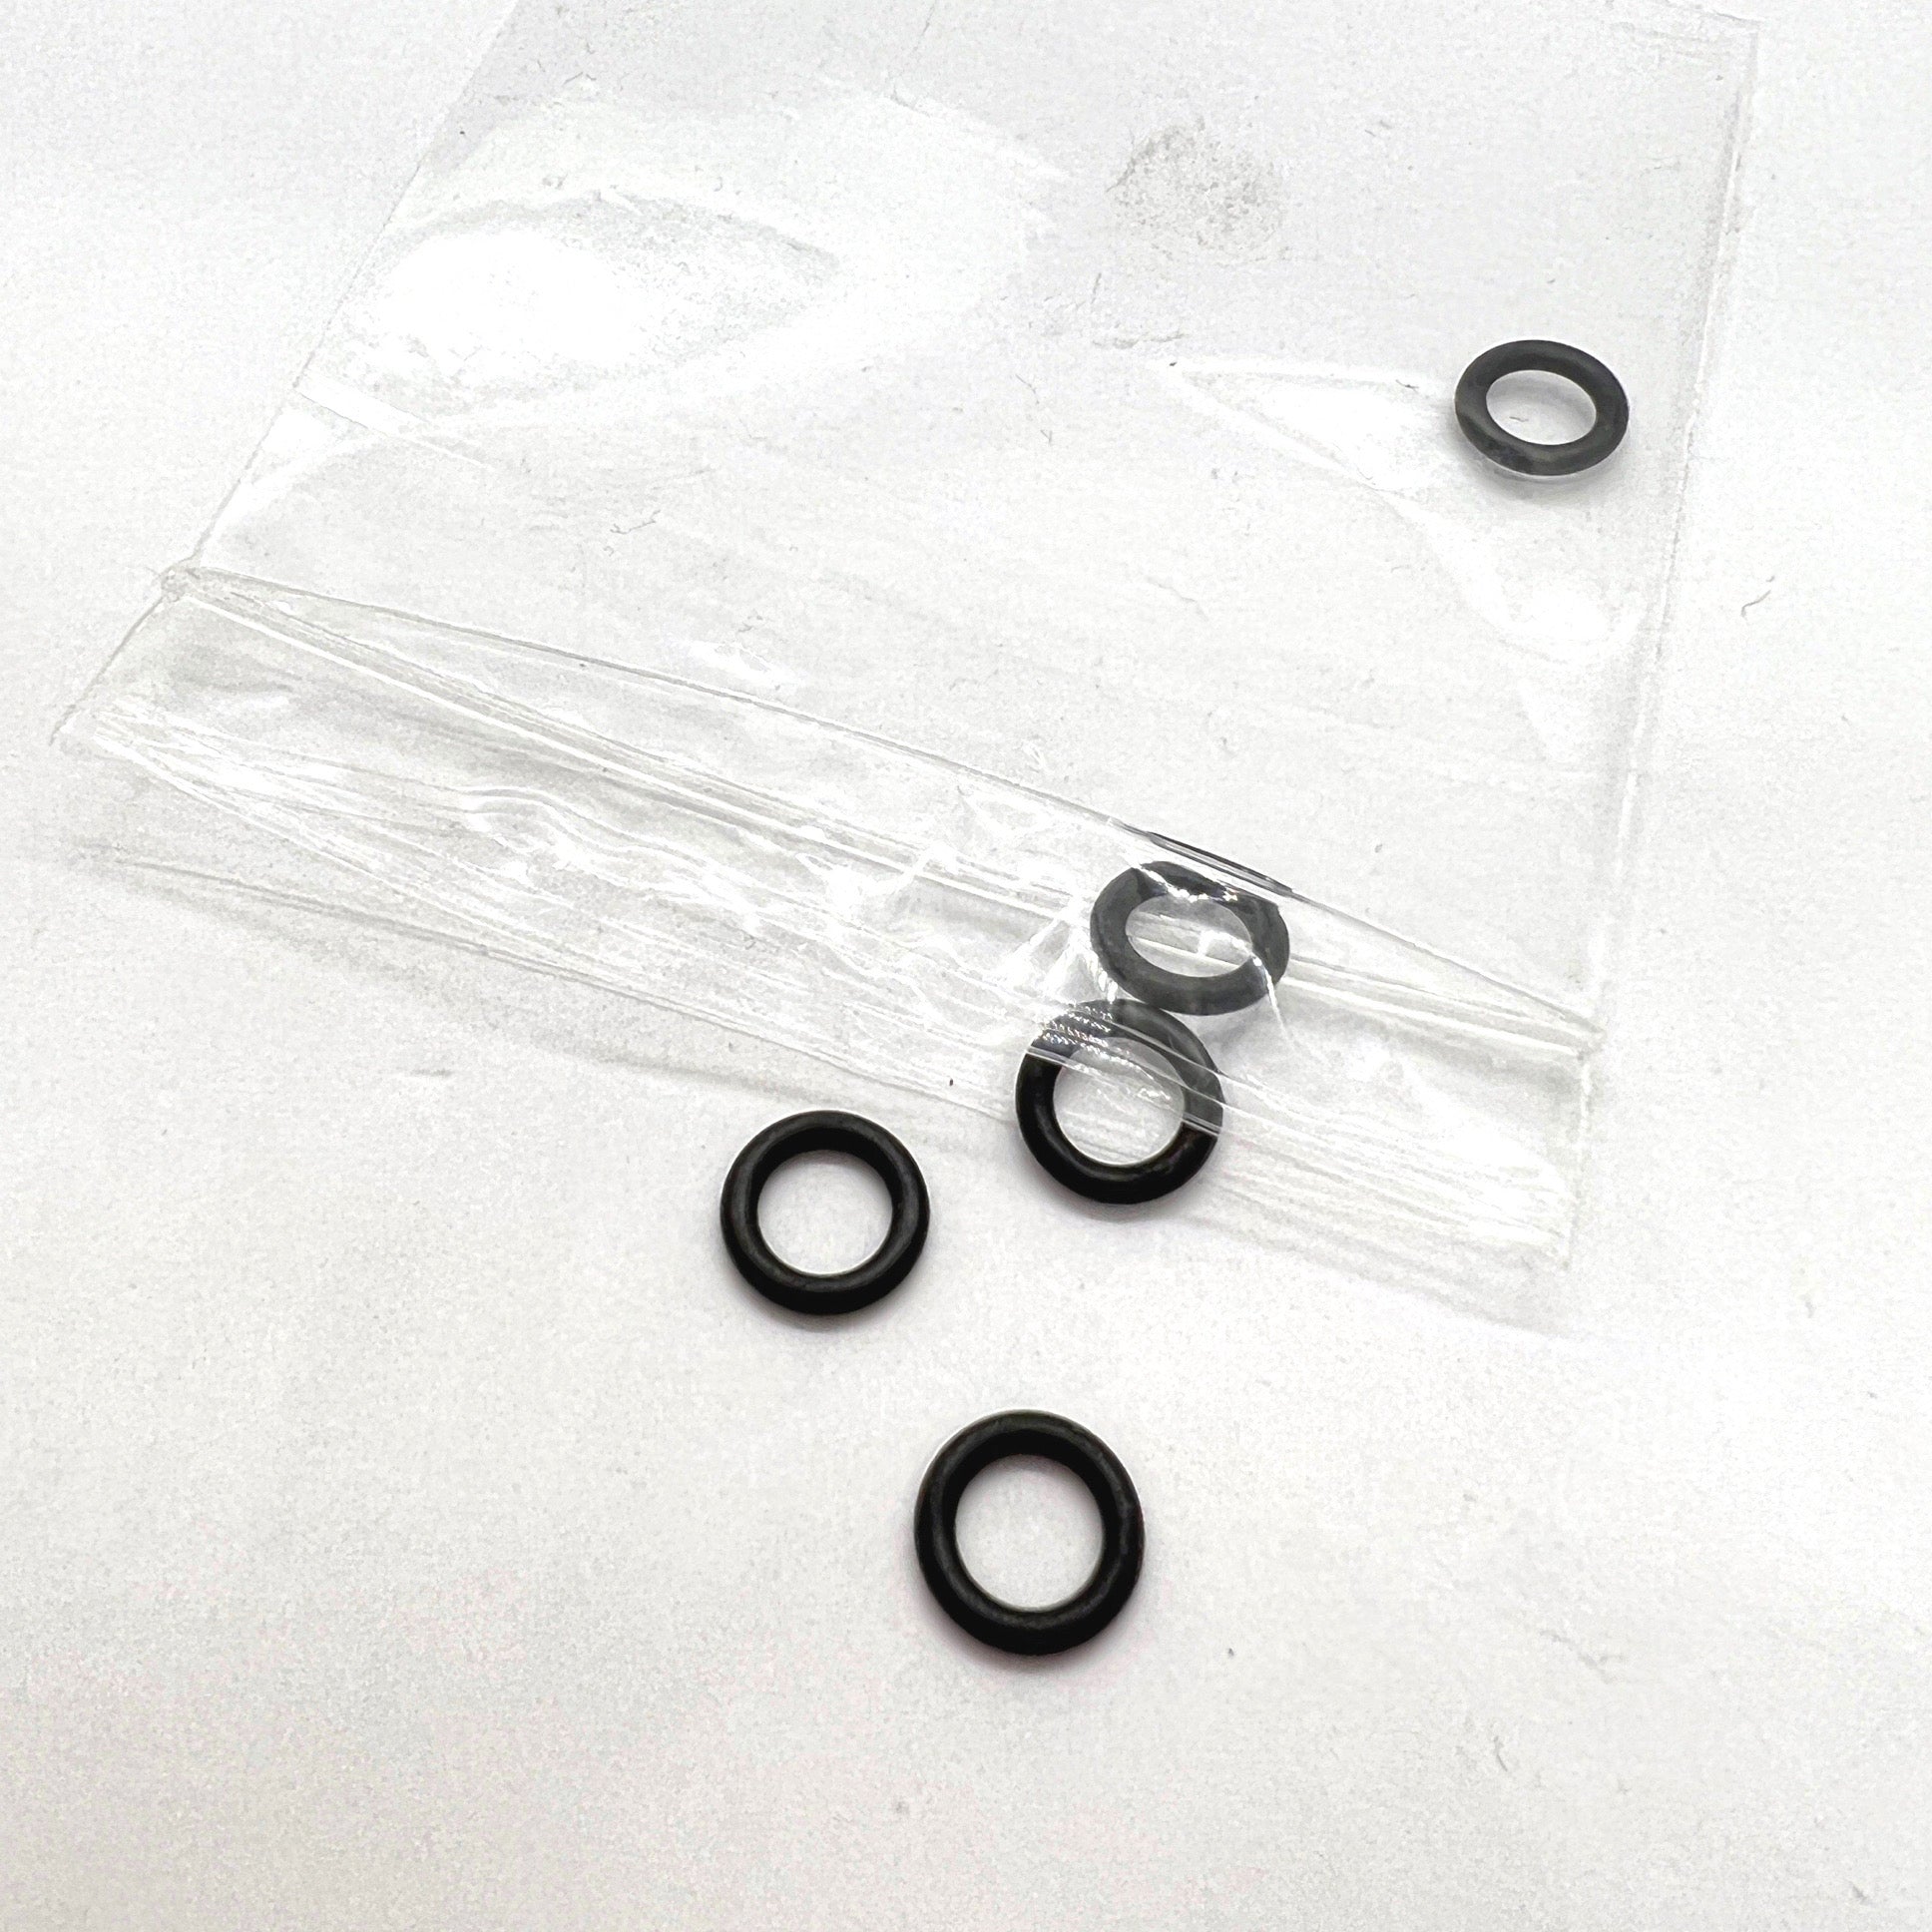 STEELDRIVER O-RING REPLACEMENTS